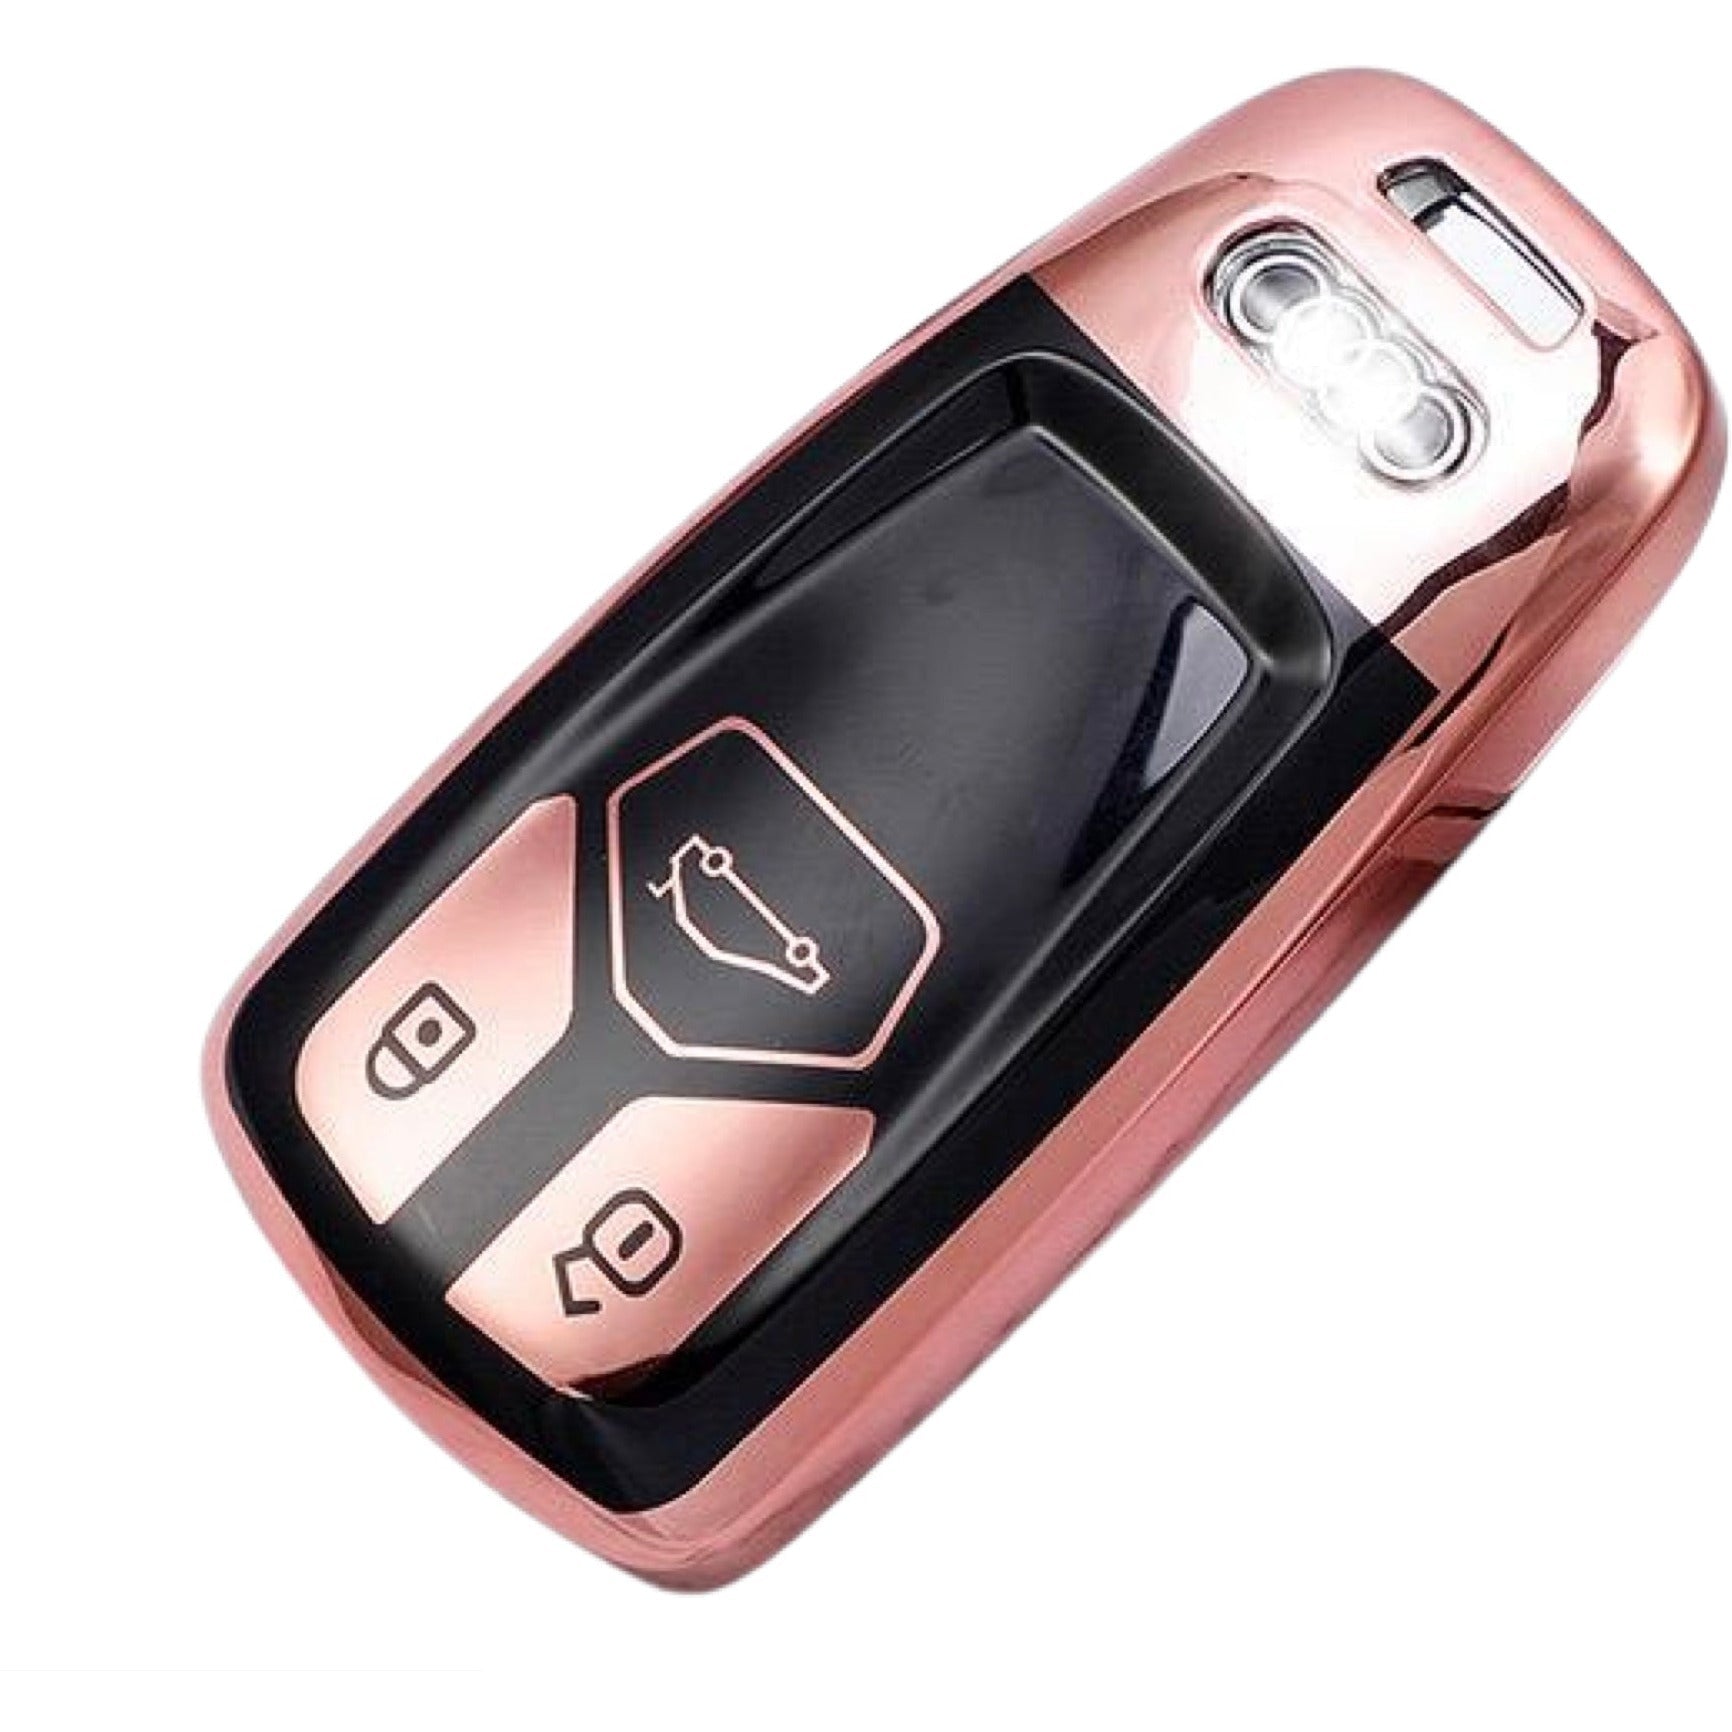 Audi key fob cover - Gloss pink and black | Keysleeves